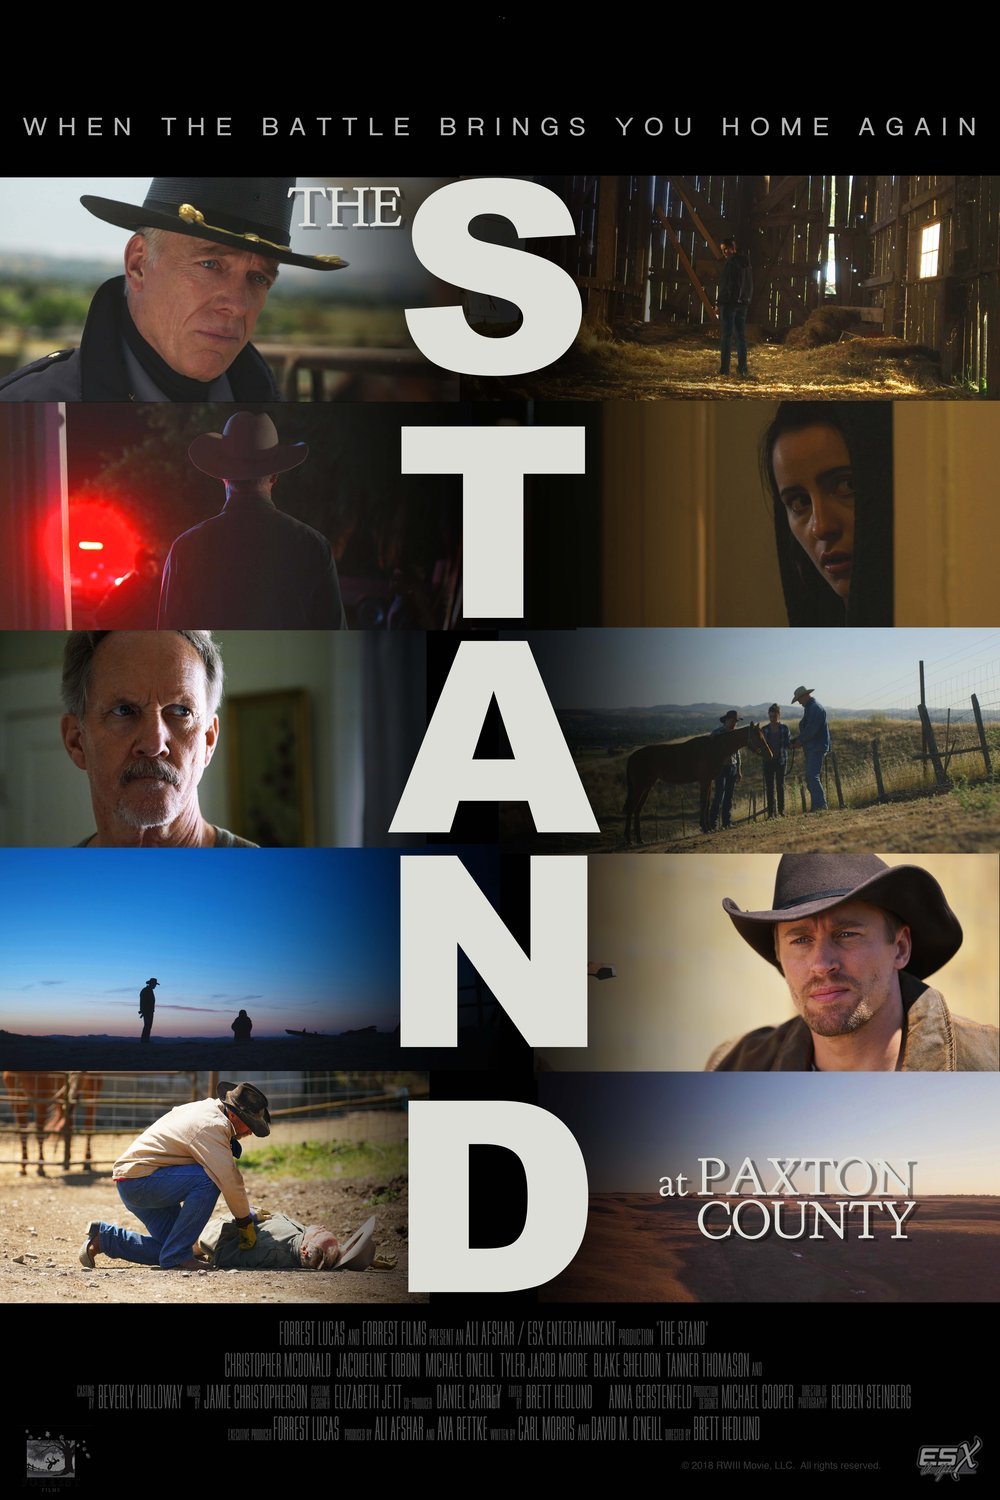 Poster of the movie The Stand at Paxton County